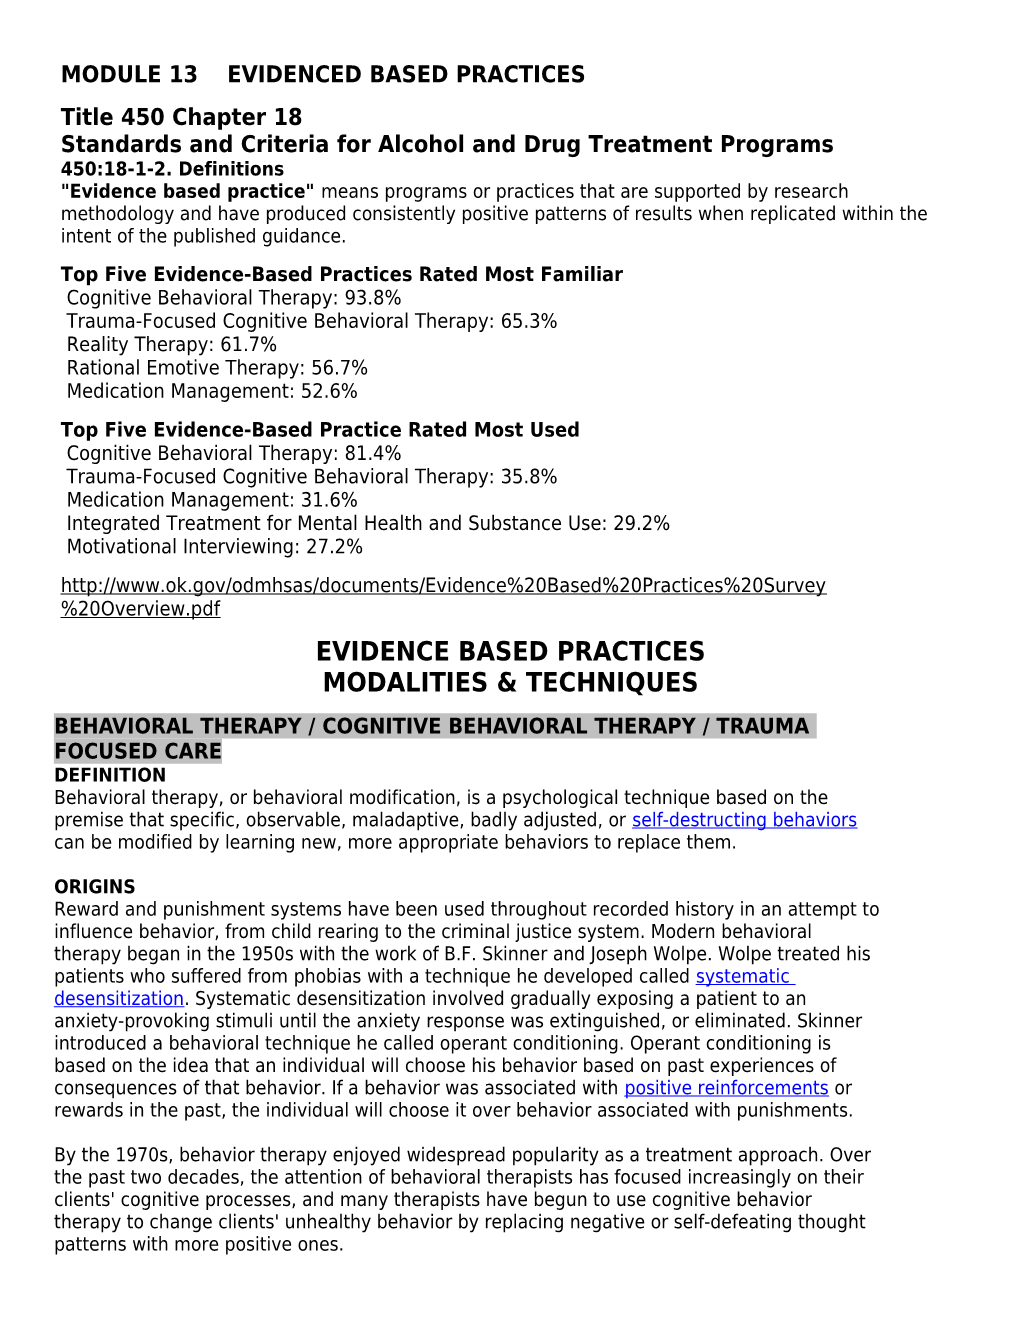 Module 13 Evidenced Based Practices